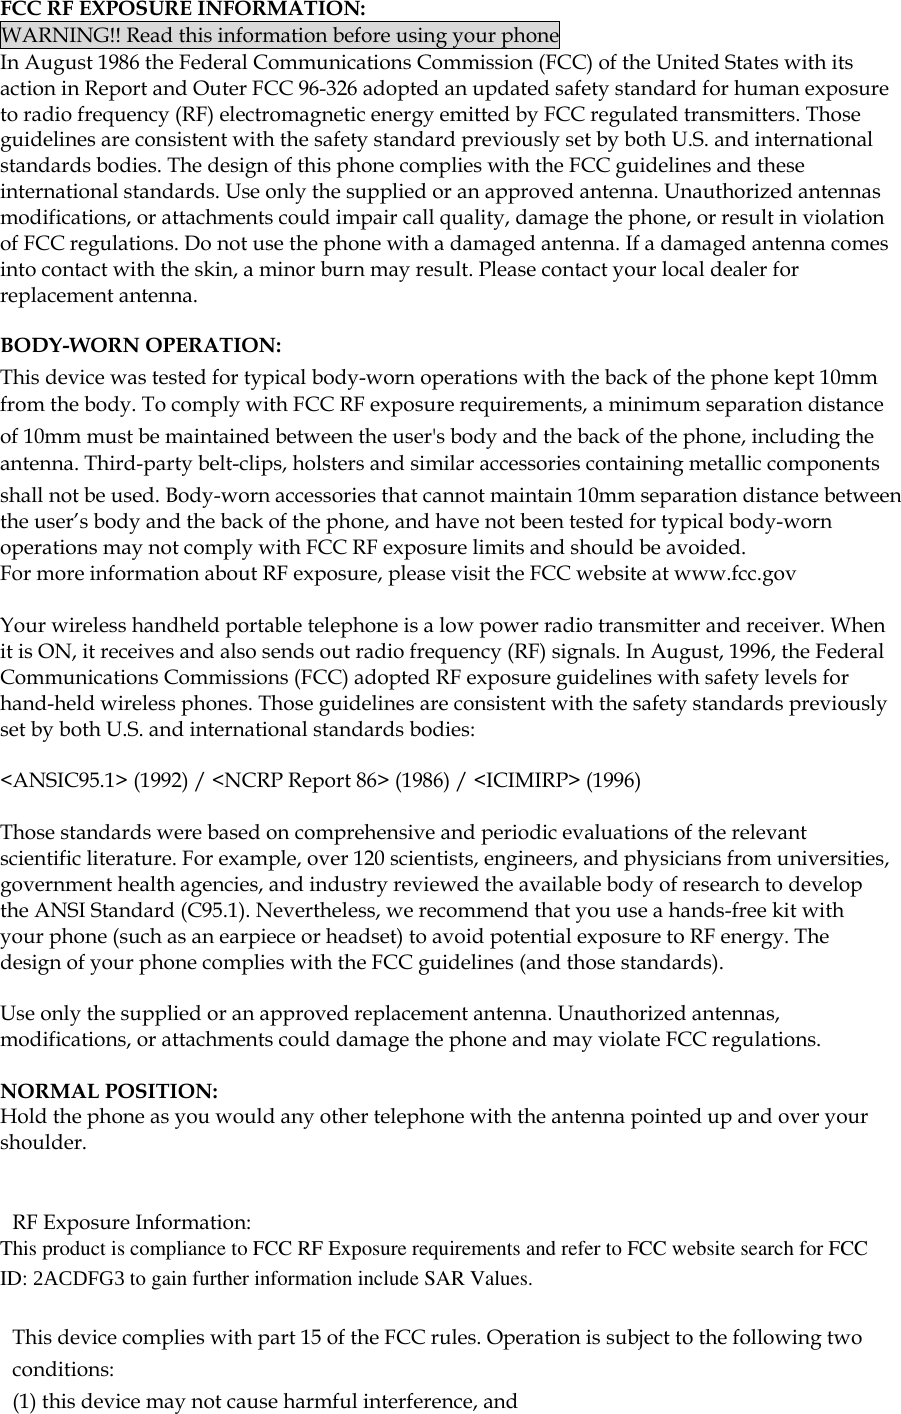  FCC RF EXPOSURE INFORMATION: WARNING!! Read this information before using your phone In August 1986 the Federal Communications Commission (FCC) of the United States with its action in Report and Outer FCC 96-326 adopted an updated safety standard for human exposure to radio frequency (RF) electromagnetic energy emitted by FCC regulated transmitters. Those guidelines are consistent with the safety standard previously set by both U.S. and international standards bodies. The design of this phone complies with the FCC guidelines and these international standards. Use only the supplied or an approved antenna. Unauthorized antennas modifications, or attachments could impair call quality, damage the phone, or result in violation of FCC regulations. Do not use the phone with a damaged antenna. If a damaged antenna comes into contact with the skin, a minor burn may result. Please contact your local dealer for replacement antenna.  BODY-WORN OPERATION: This device was tested for typical body-worn operations with the back of the phone kept 10mm from the body. To comply with FCC RF exposure requirements, a minimum separation distance of 10mm must be maintained between the user&apos;s body and the back of the phone, including the antenna. Third-party belt-clips, holsters and similar accessories containing metallic components shall not be used. Body-worn accessories that cannot maintain 10mm separation distance between the user’s body and the back of the phone, and have not been tested for typical body-worn operations may not comply with FCC RF exposure limits and should be avoided. For more information about RF exposure, please visit the FCC website at www.fcc.gov  Your wireless handheld portable telephone is a low power radio transmitter and receiver. When it is ON, it receives and also sends out radio frequency (RF) signals. In August, 1996, the Federal Communications Commissions (FCC) adopted RF exposure guidelines with safety levels for hand-held wireless phones. Those guidelines are consistent with the safety standards previously set by both U.S. and international standards bodies:  &lt;ANSIC95.1&gt; (1992) / &lt;NCRP Report 86&gt; (1986) / &lt;ICIMIRP&gt; (1996)  Those standards were based on comprehensive and periodic evaluations of the relevant scientific literature. For example, over 120 scientists, engineers, and physicians from universities, government health agencies, and industry reviewed the available body of research to develop the ANSI Standard (C95.1). Nevertheless, we recommend that you use a hands-free kit with your phone (such as an earpiece or headset) to avoid potential exposure to RF energy. The design of your phone complies with the FCC guidelines (and those standards).  Use only the supplied or an approved replacement antenna. Unauthorized antennas, modifications, or attachments could damage the phone and may violate FCC regulations.   NORMAL POSITION:  Hold the phone as you would any other telephone with the antenna pointed up and over your shoulder.   RF Exposure Information: This product is compliance to FCC RF Exposure requirements and refer to FCC website search for FCC ID: 2ACDFG3 to gain further information include SAR Values.    This device complies with part 15 of the FCC rules. Operation is subject to the following two conditions: (1) this device may not cause harmful interference, and 